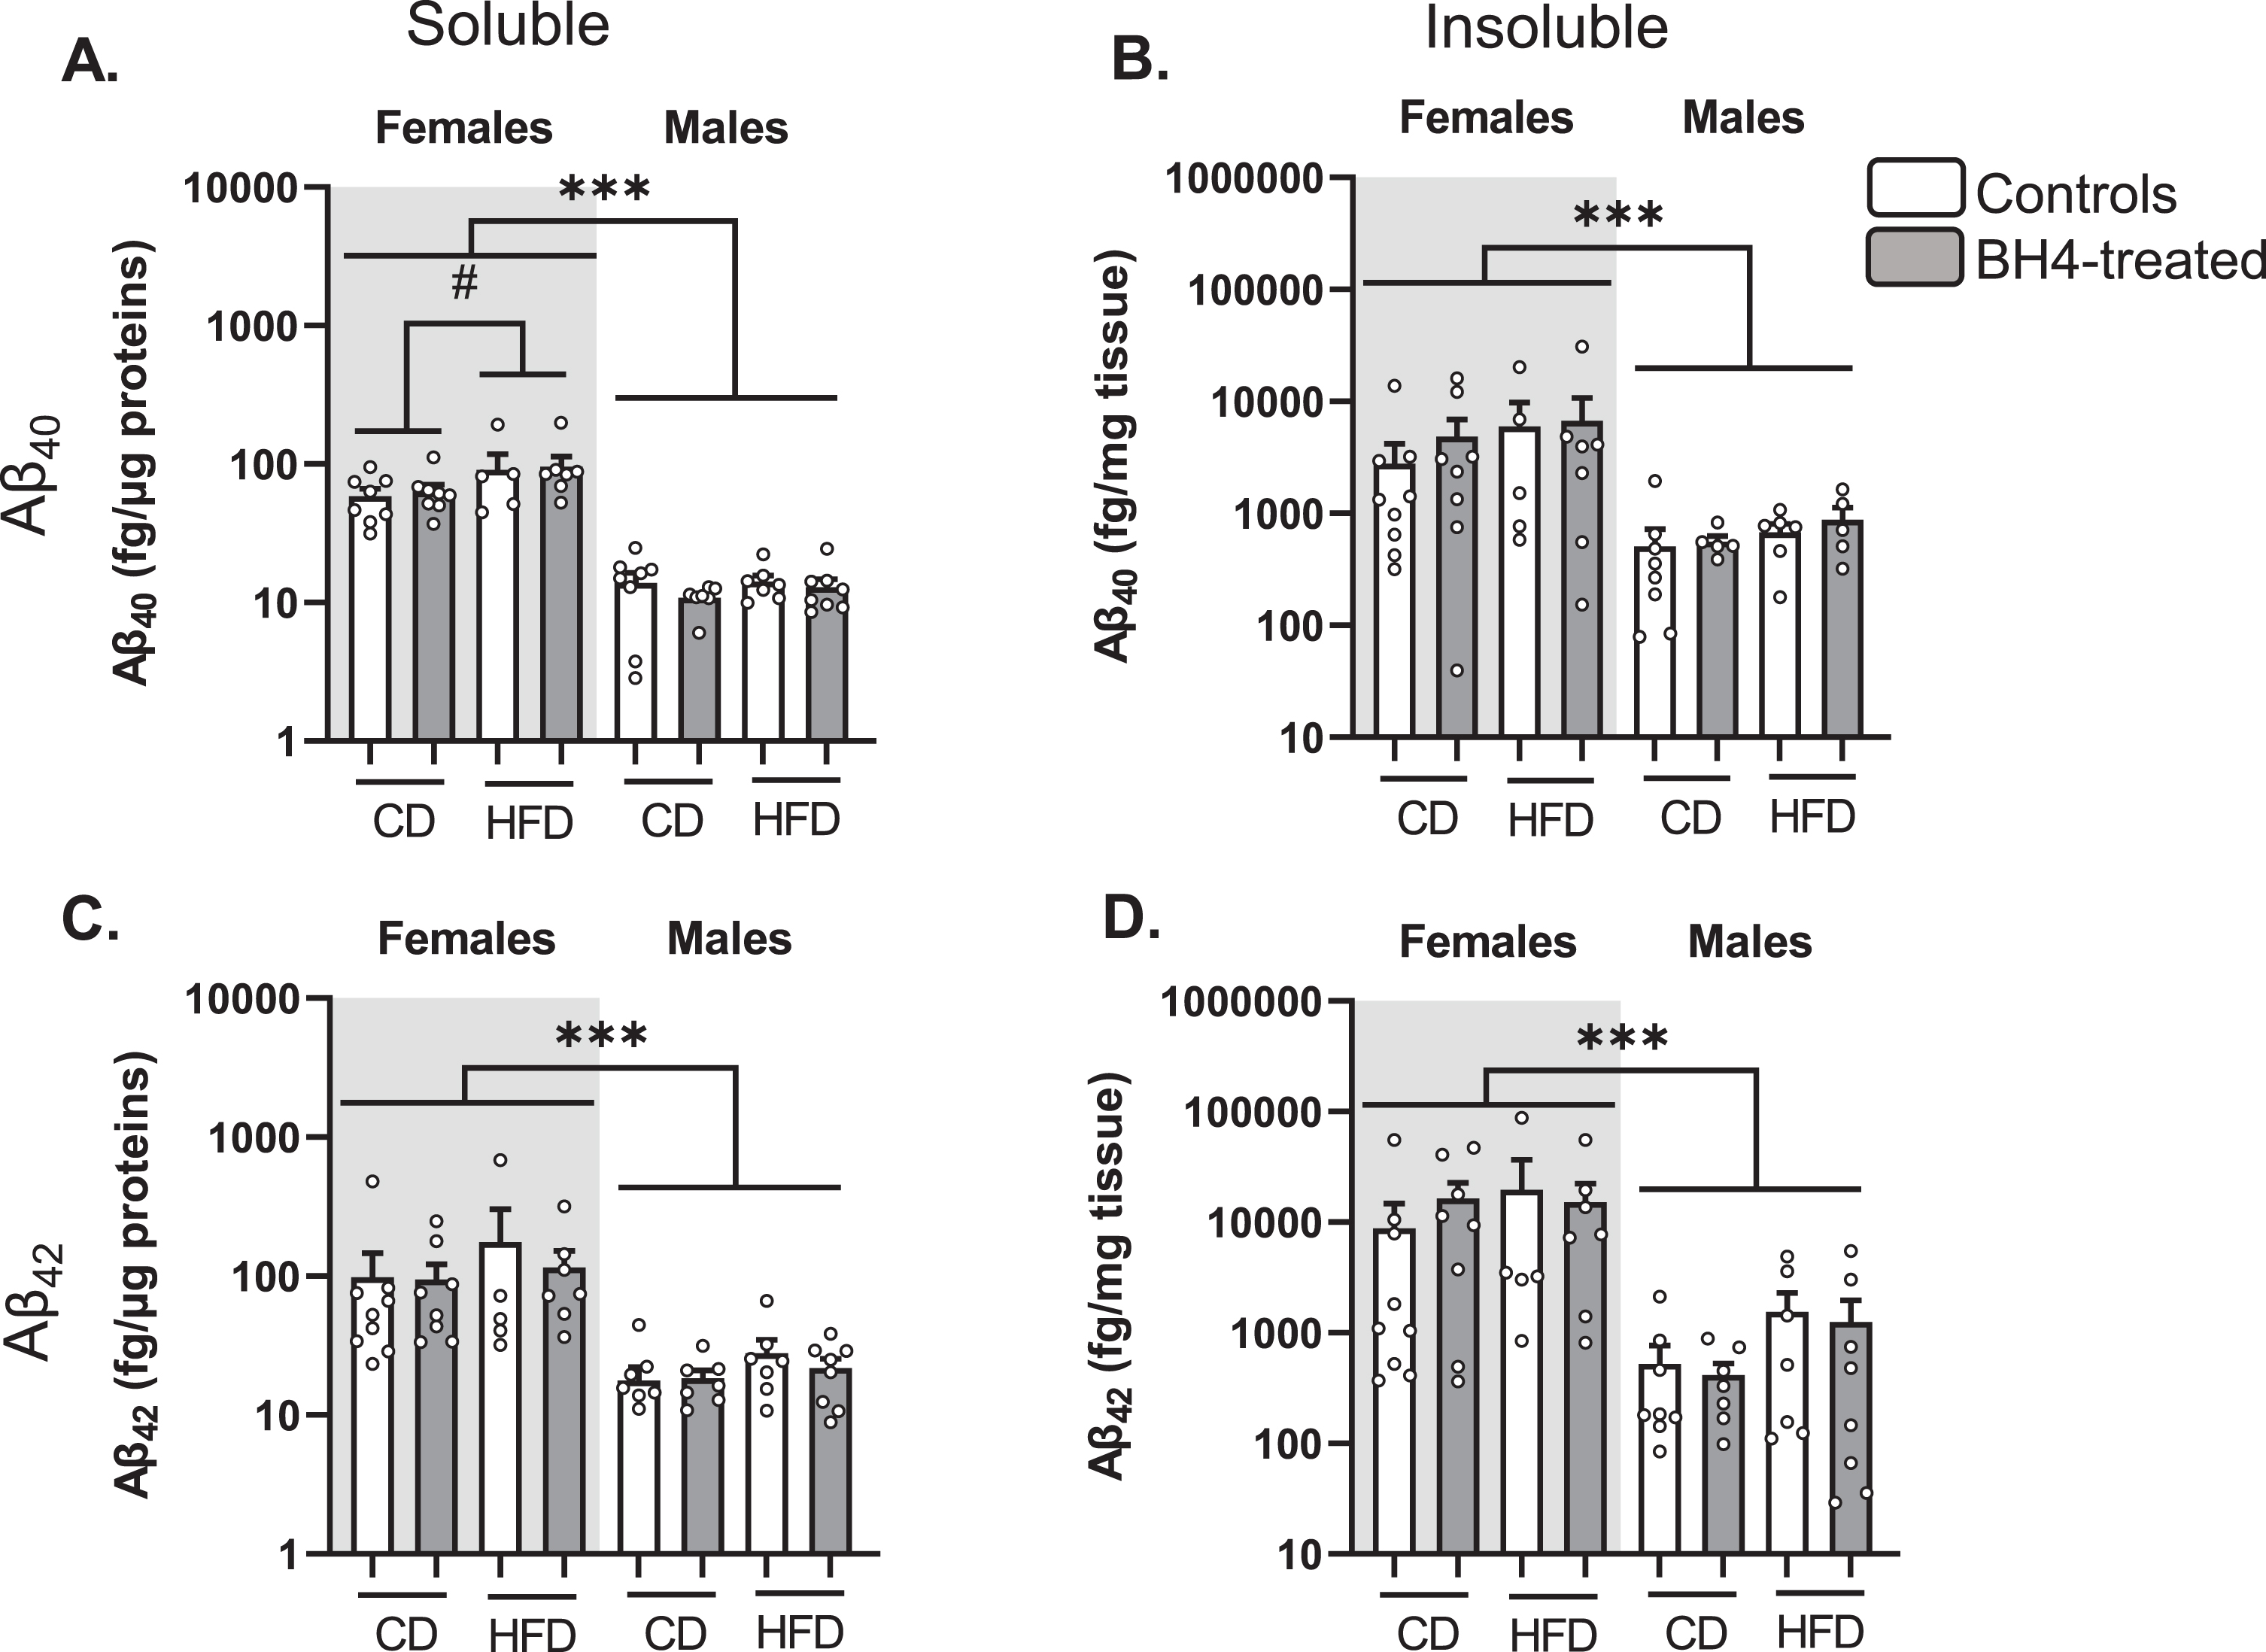 BH4 administration does not affect Aβ peptide levels in 3xTg-AD mice. Quantification of Aβ40 (A, B) and Aβ42 (C, D) peptides by ELISA in soluble and insoluble fractions of parieto-temporal cortex from 3xTg-AD mice. Females and males are represented separately on a logarithmic scale because of higher amyloid pathology in females. Values are expressed as mean±SEM with N = 5–8/group. Statistical analyses: ***p < 0.001, Sex effect (Multimodal ANOVA); #p < 0.05, HFD effect in females (Multimodal ANOVA).